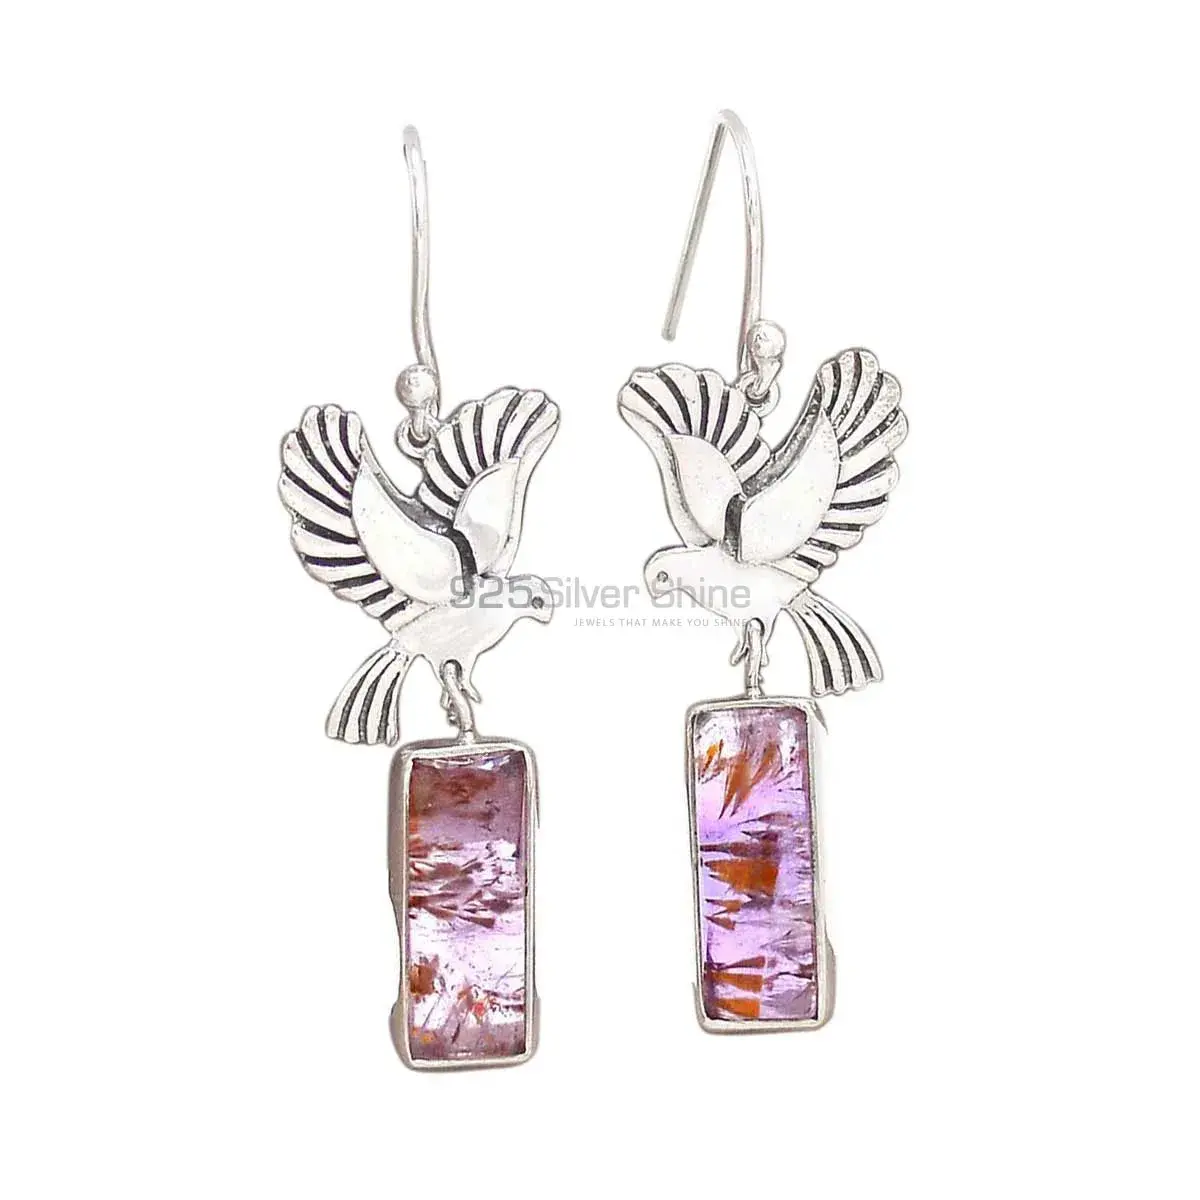 925 Sterling Silver Earrings Suppliers In Semi Precious Cacoxenite Gemstone 925SE2668_1